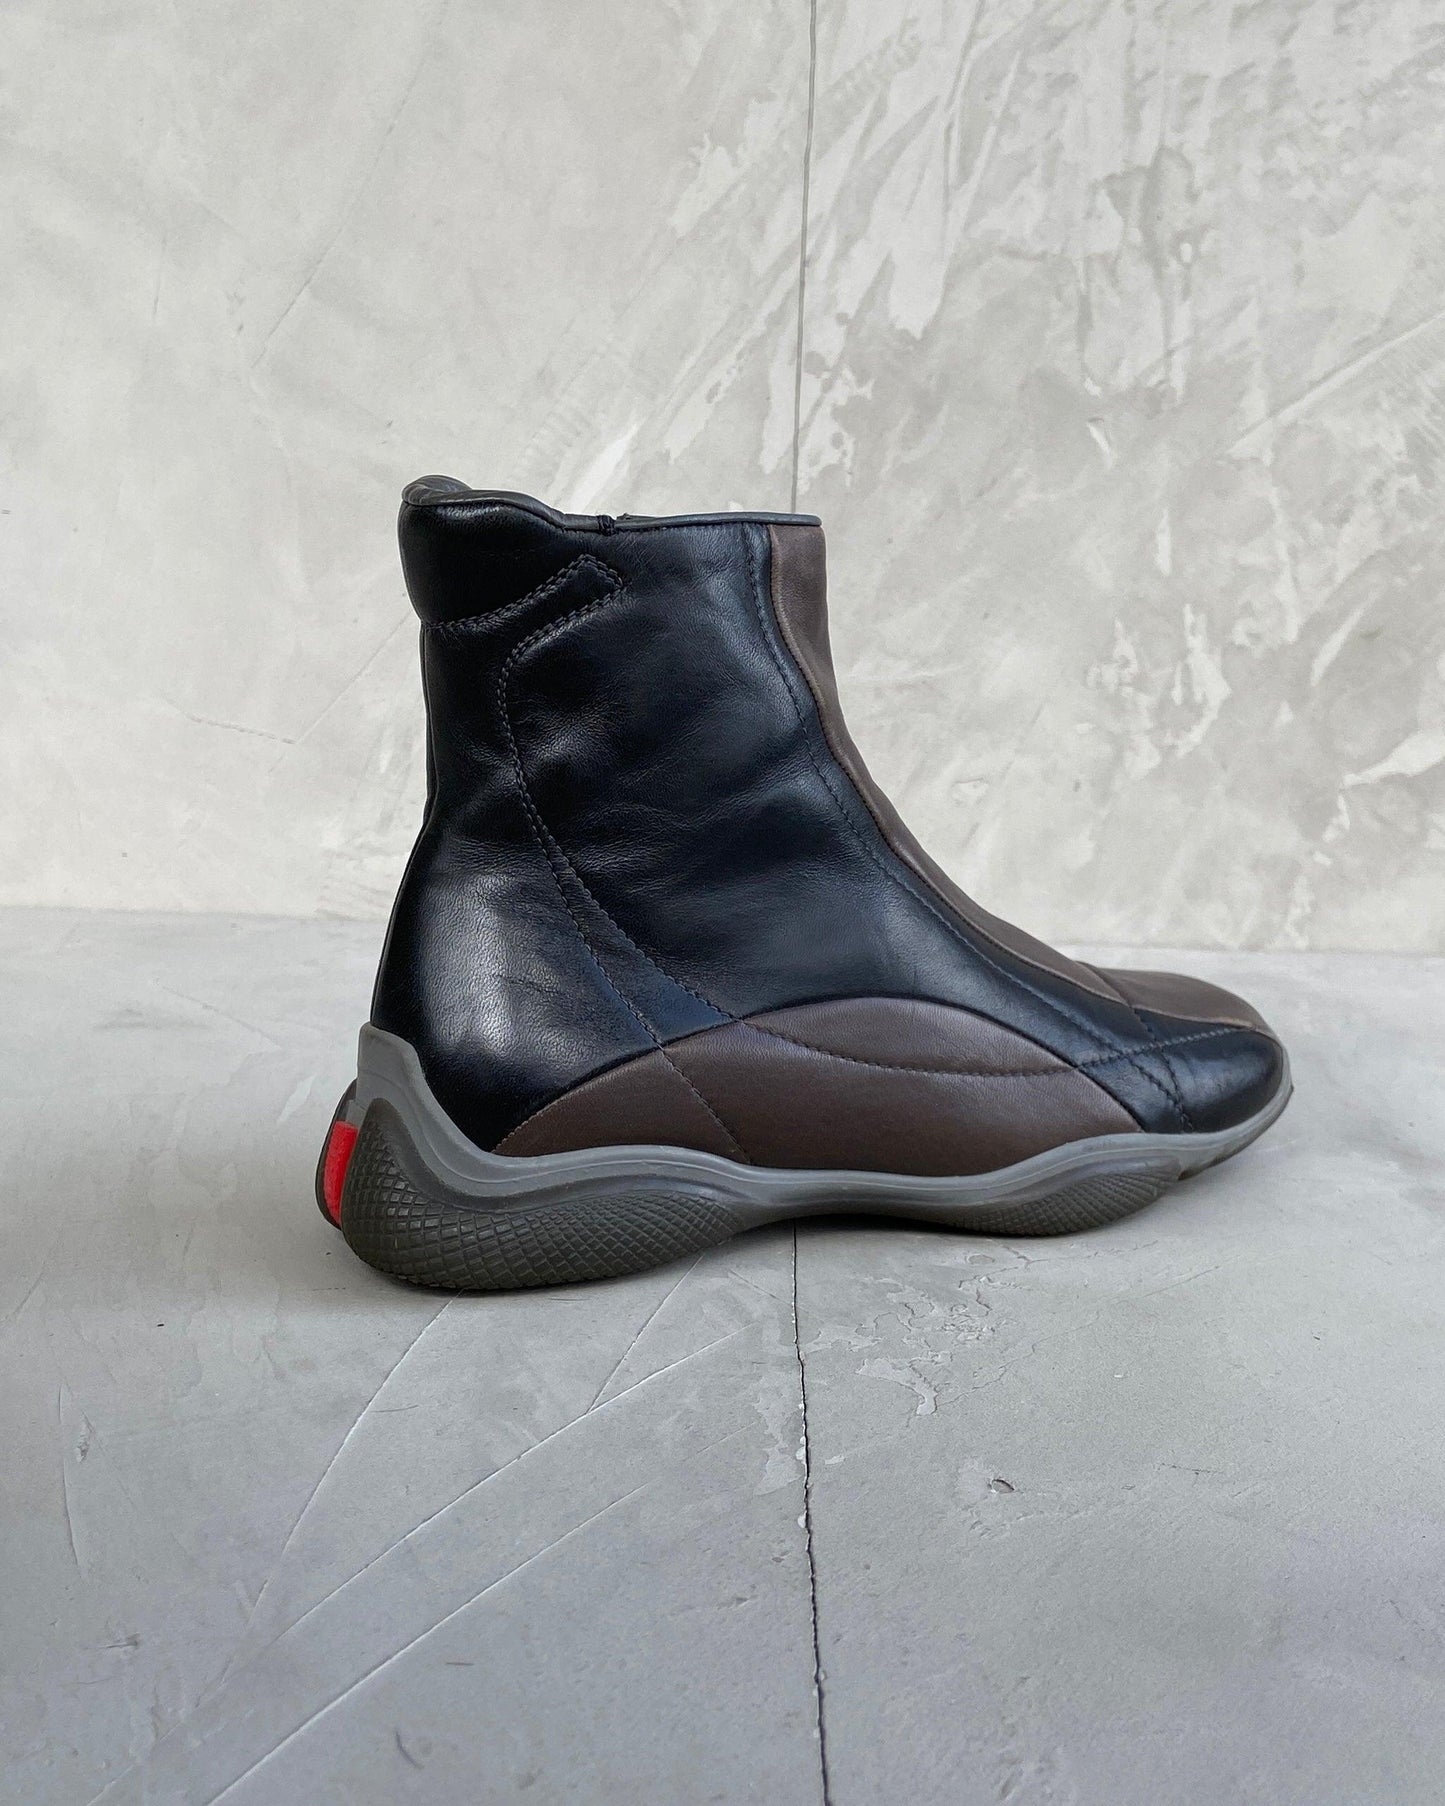 PRADA SPORT TWO-TONE LEATHER BOOTS - UK 3 - Known Source